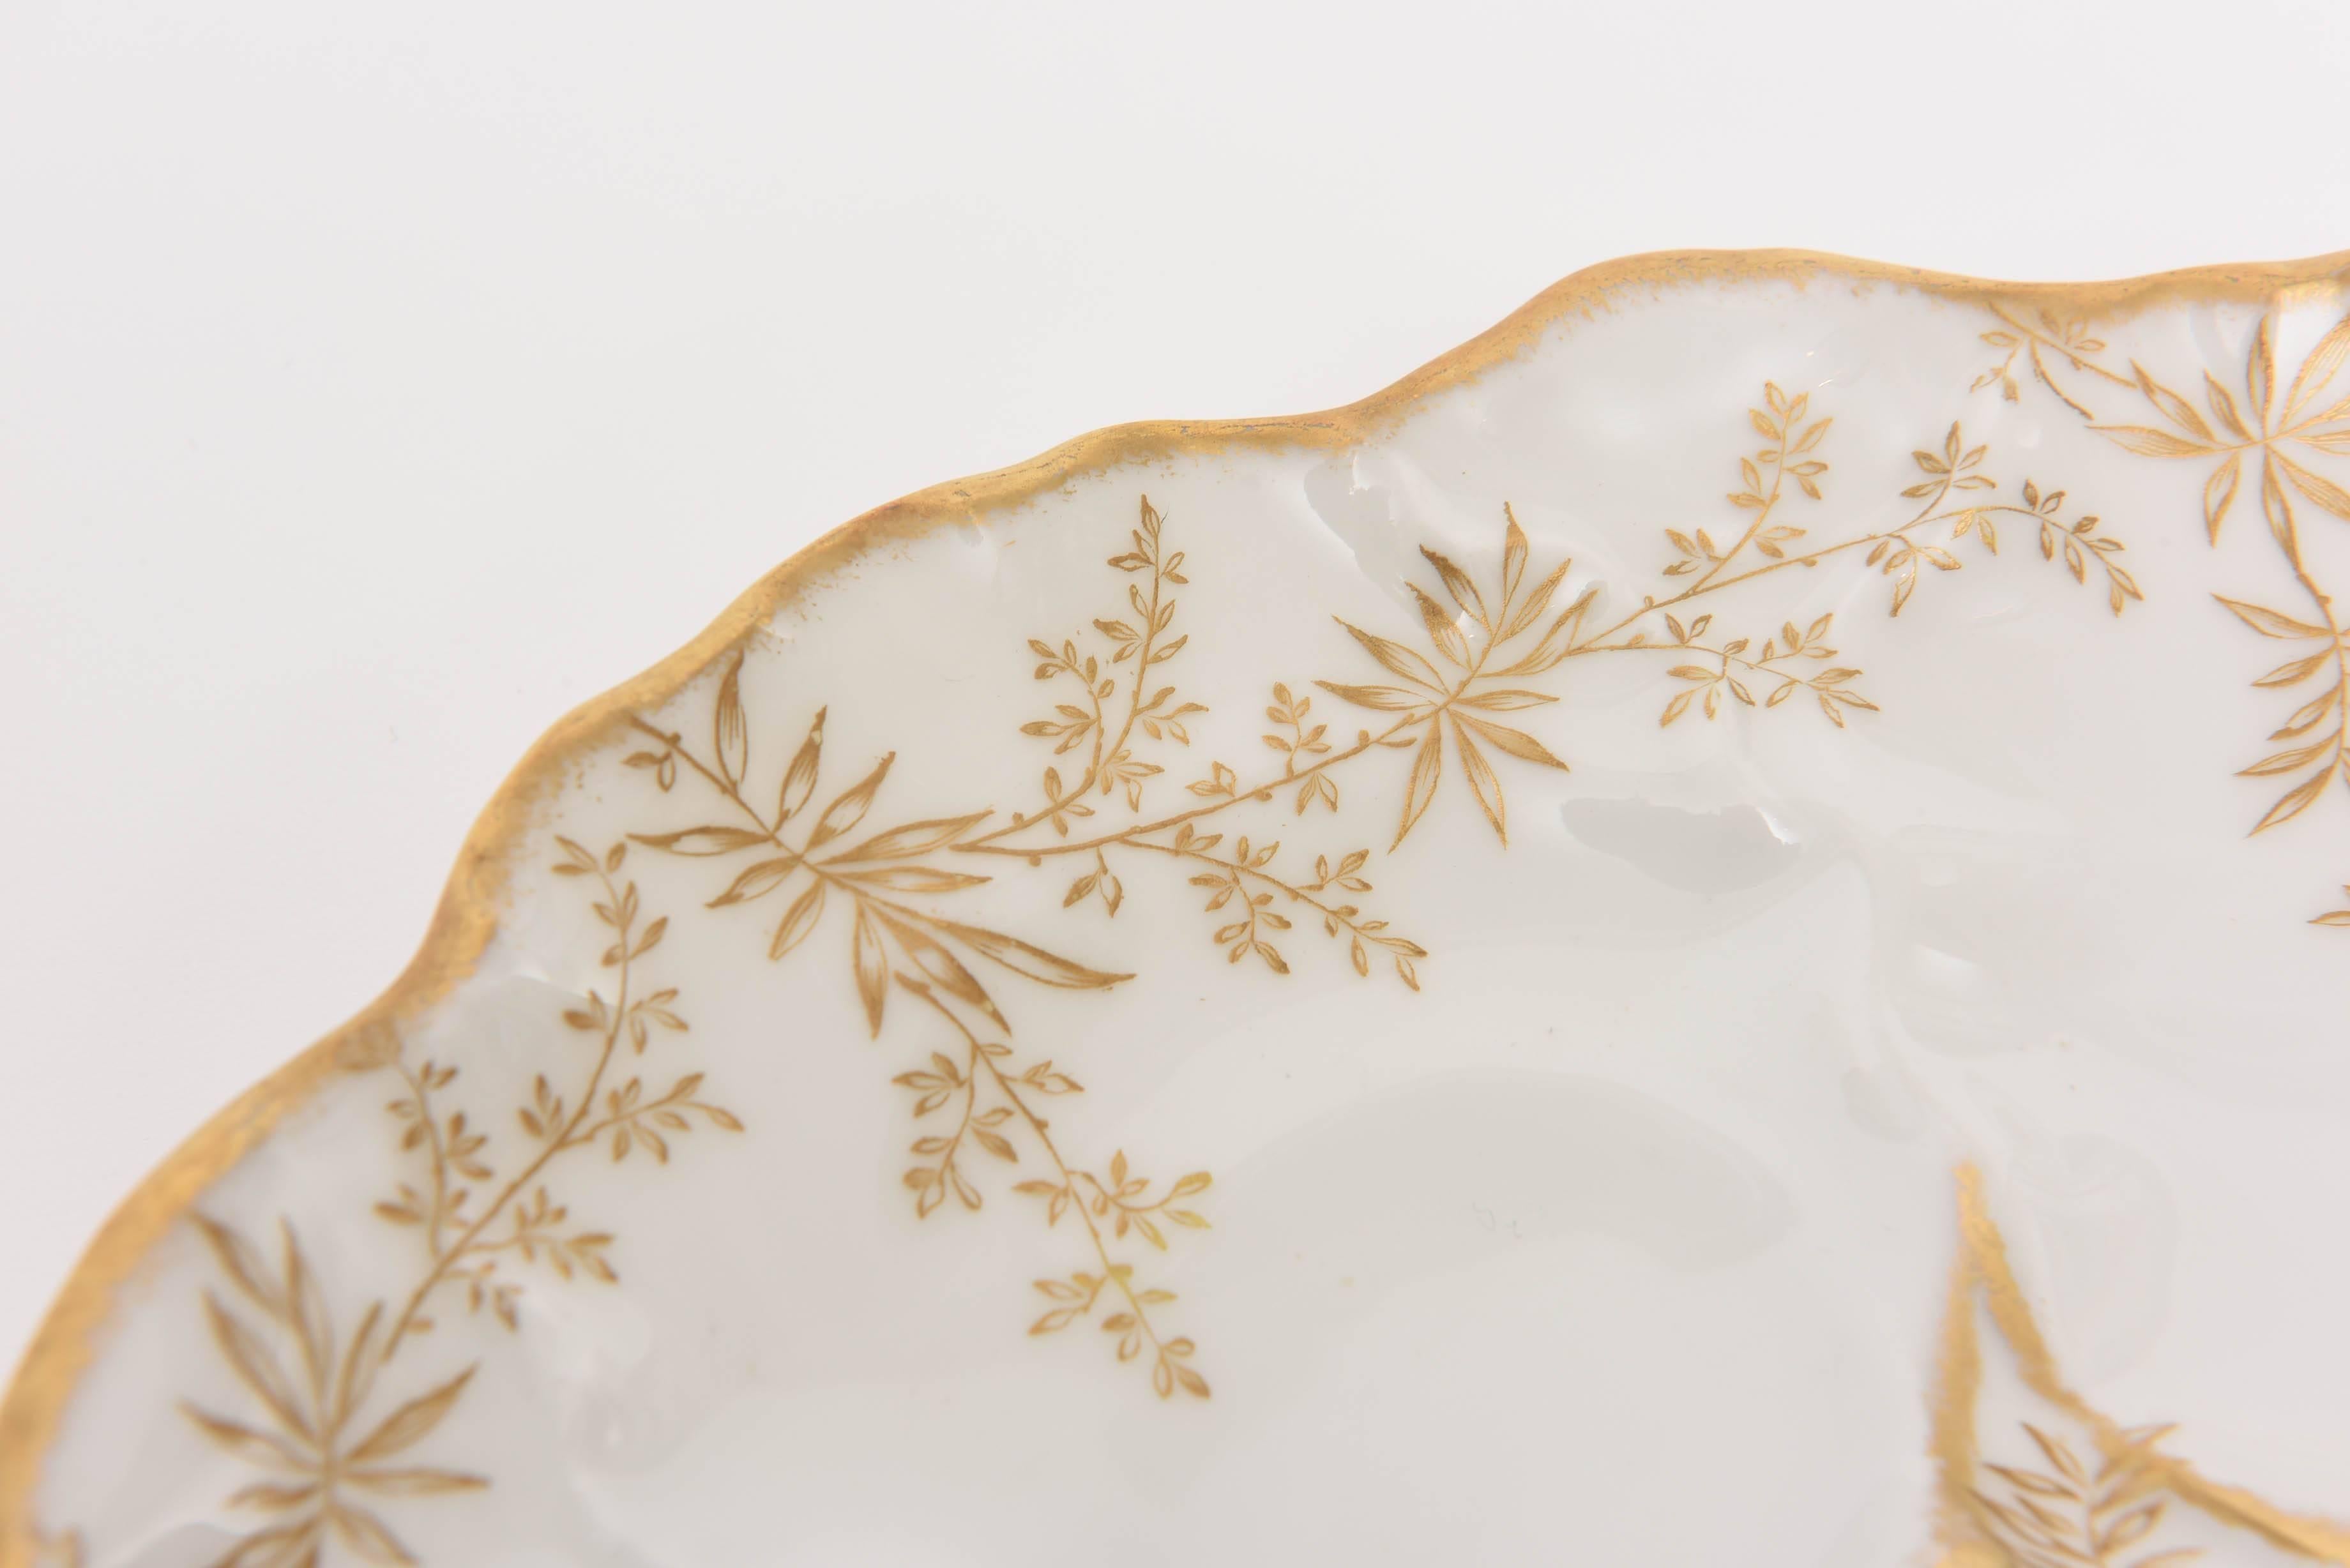 Hand-Crafted Oyster Plate by Limoges France, Scalloped Shape and Hand-Painted Gold